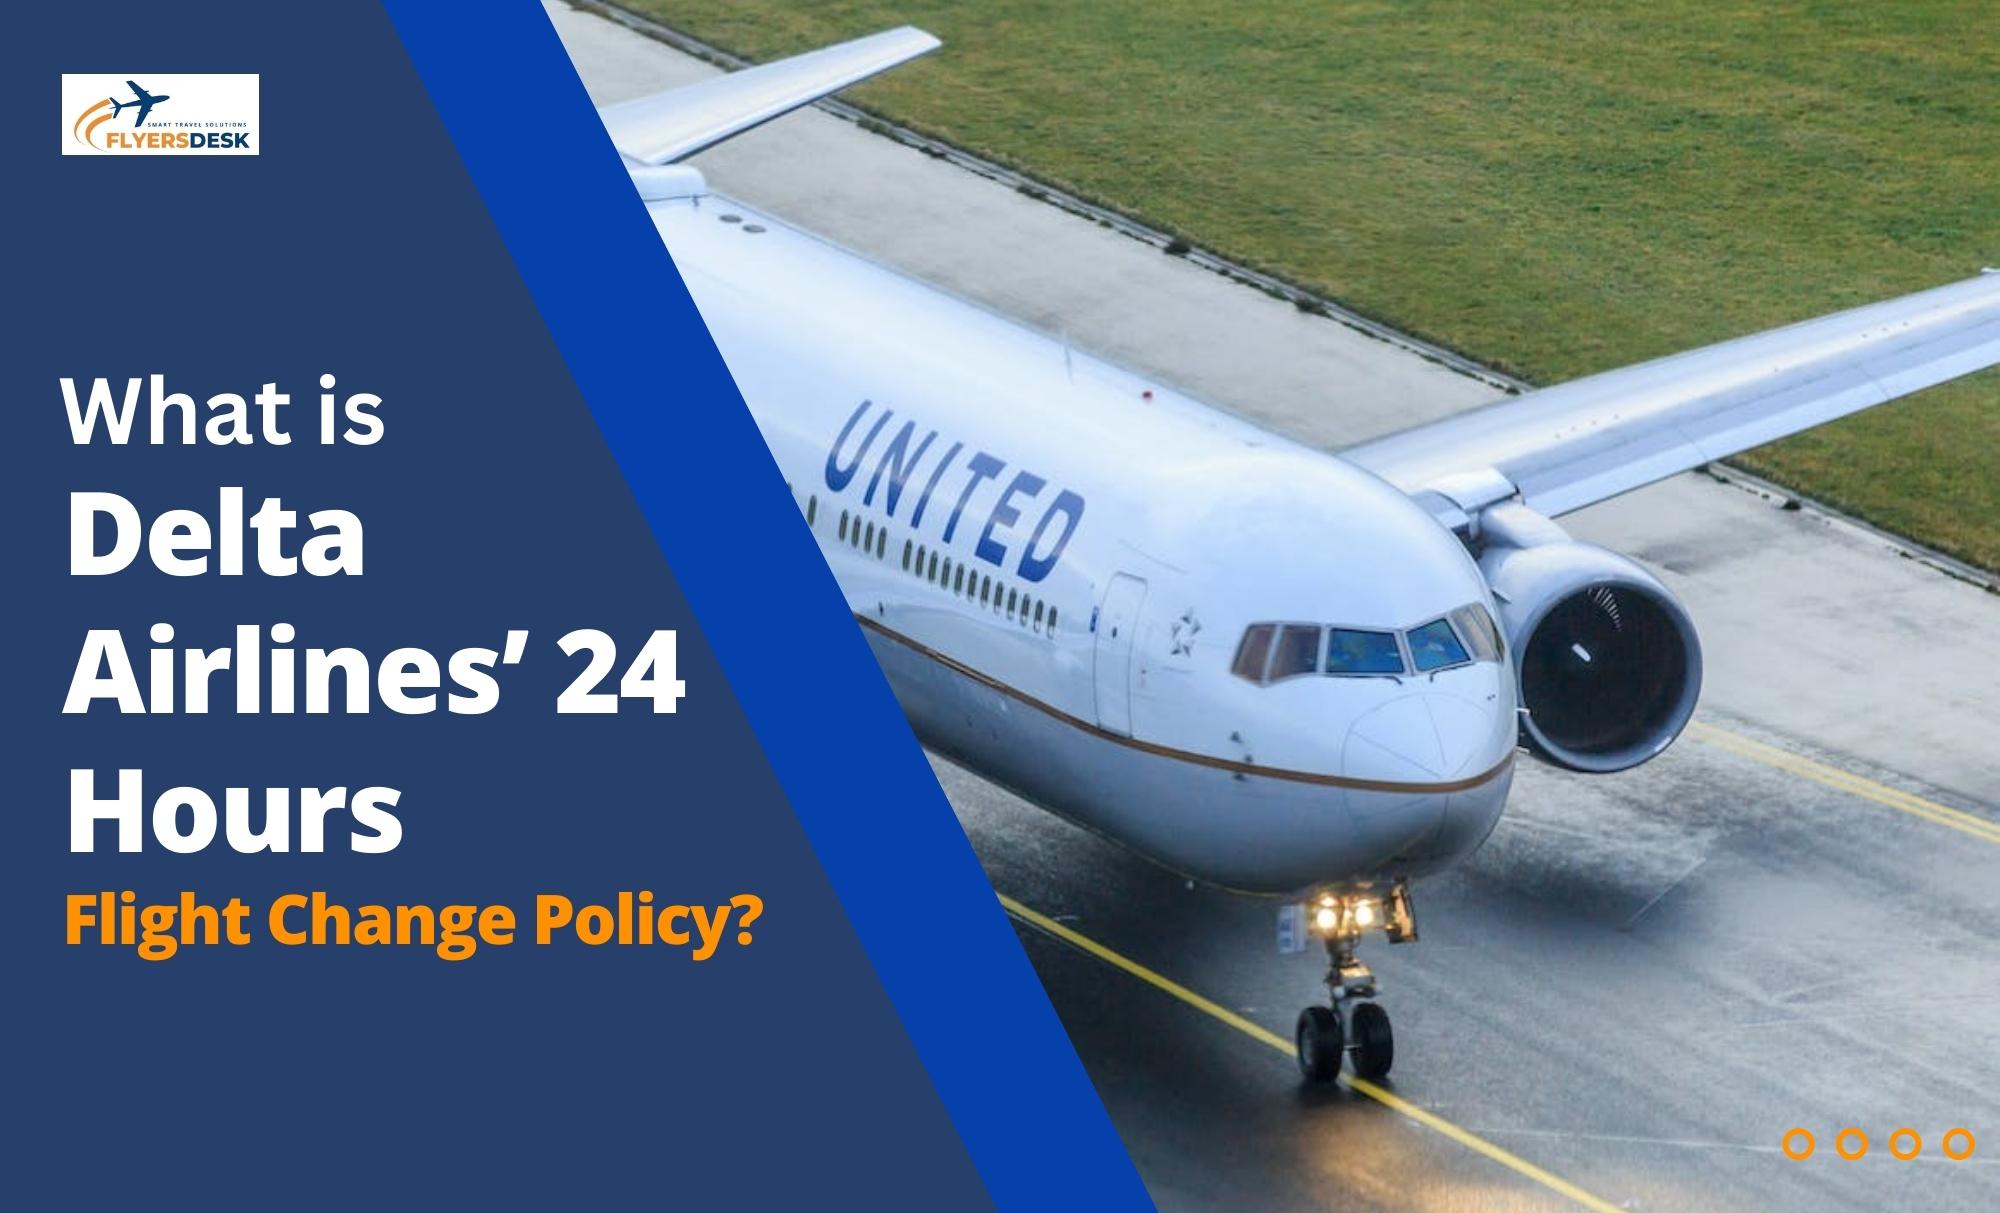 Delta Airlines’ 24 Hours Flight Change Policy